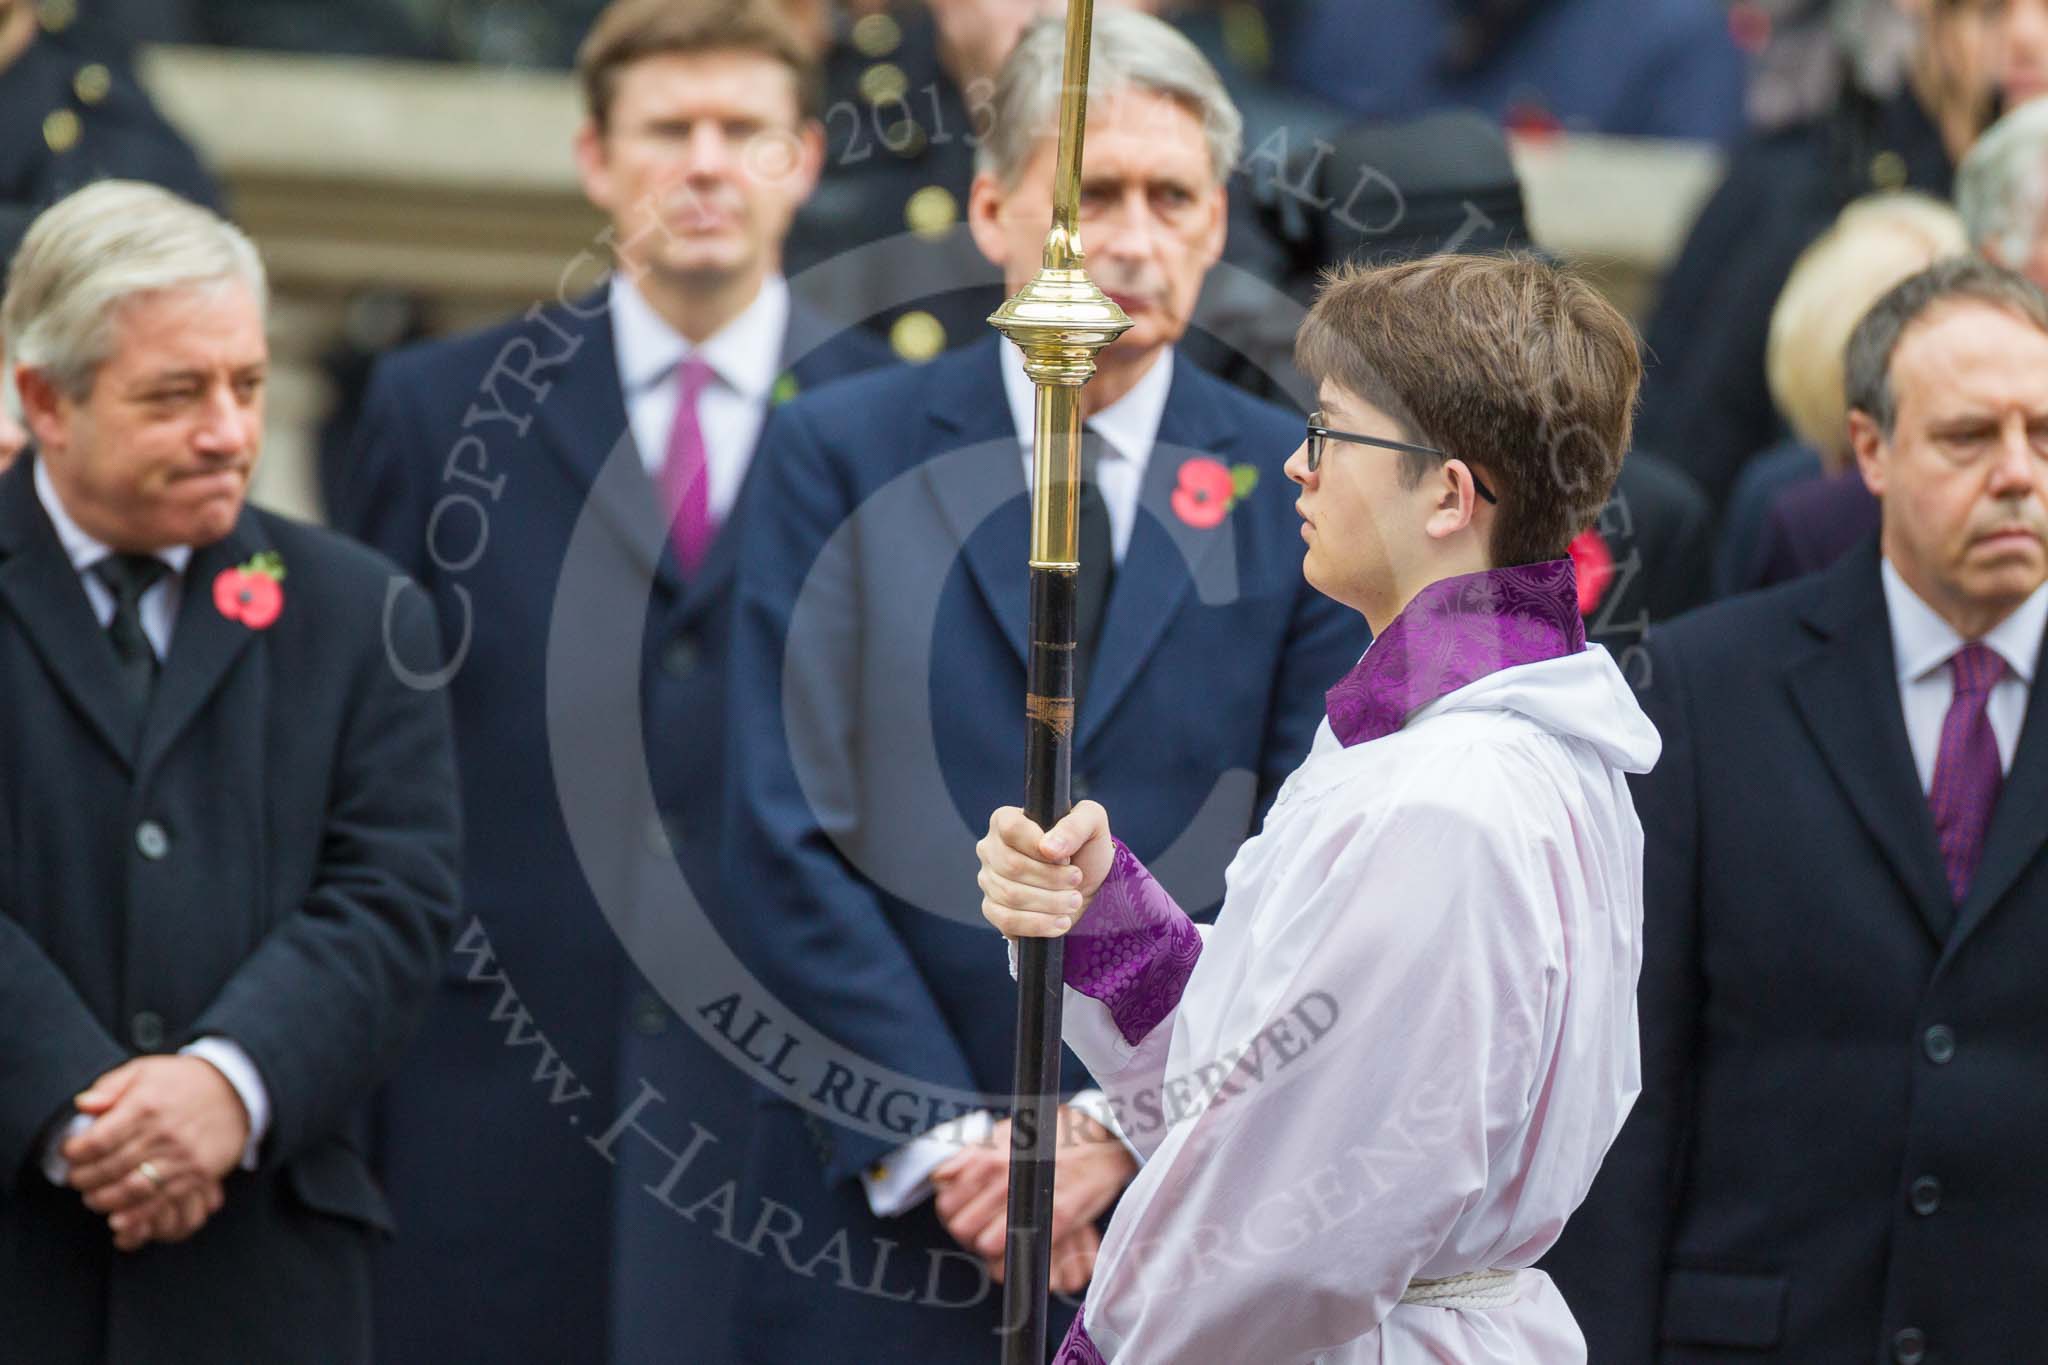 Remembrance Sunday at the Cenotaph 2015: The Cross Bearer, Jason Panagiotopoulos, on the way back to the Foreign- and Commonwealth Office. Image #321, 08 November 2015 11:21 Whitehall, London, UK